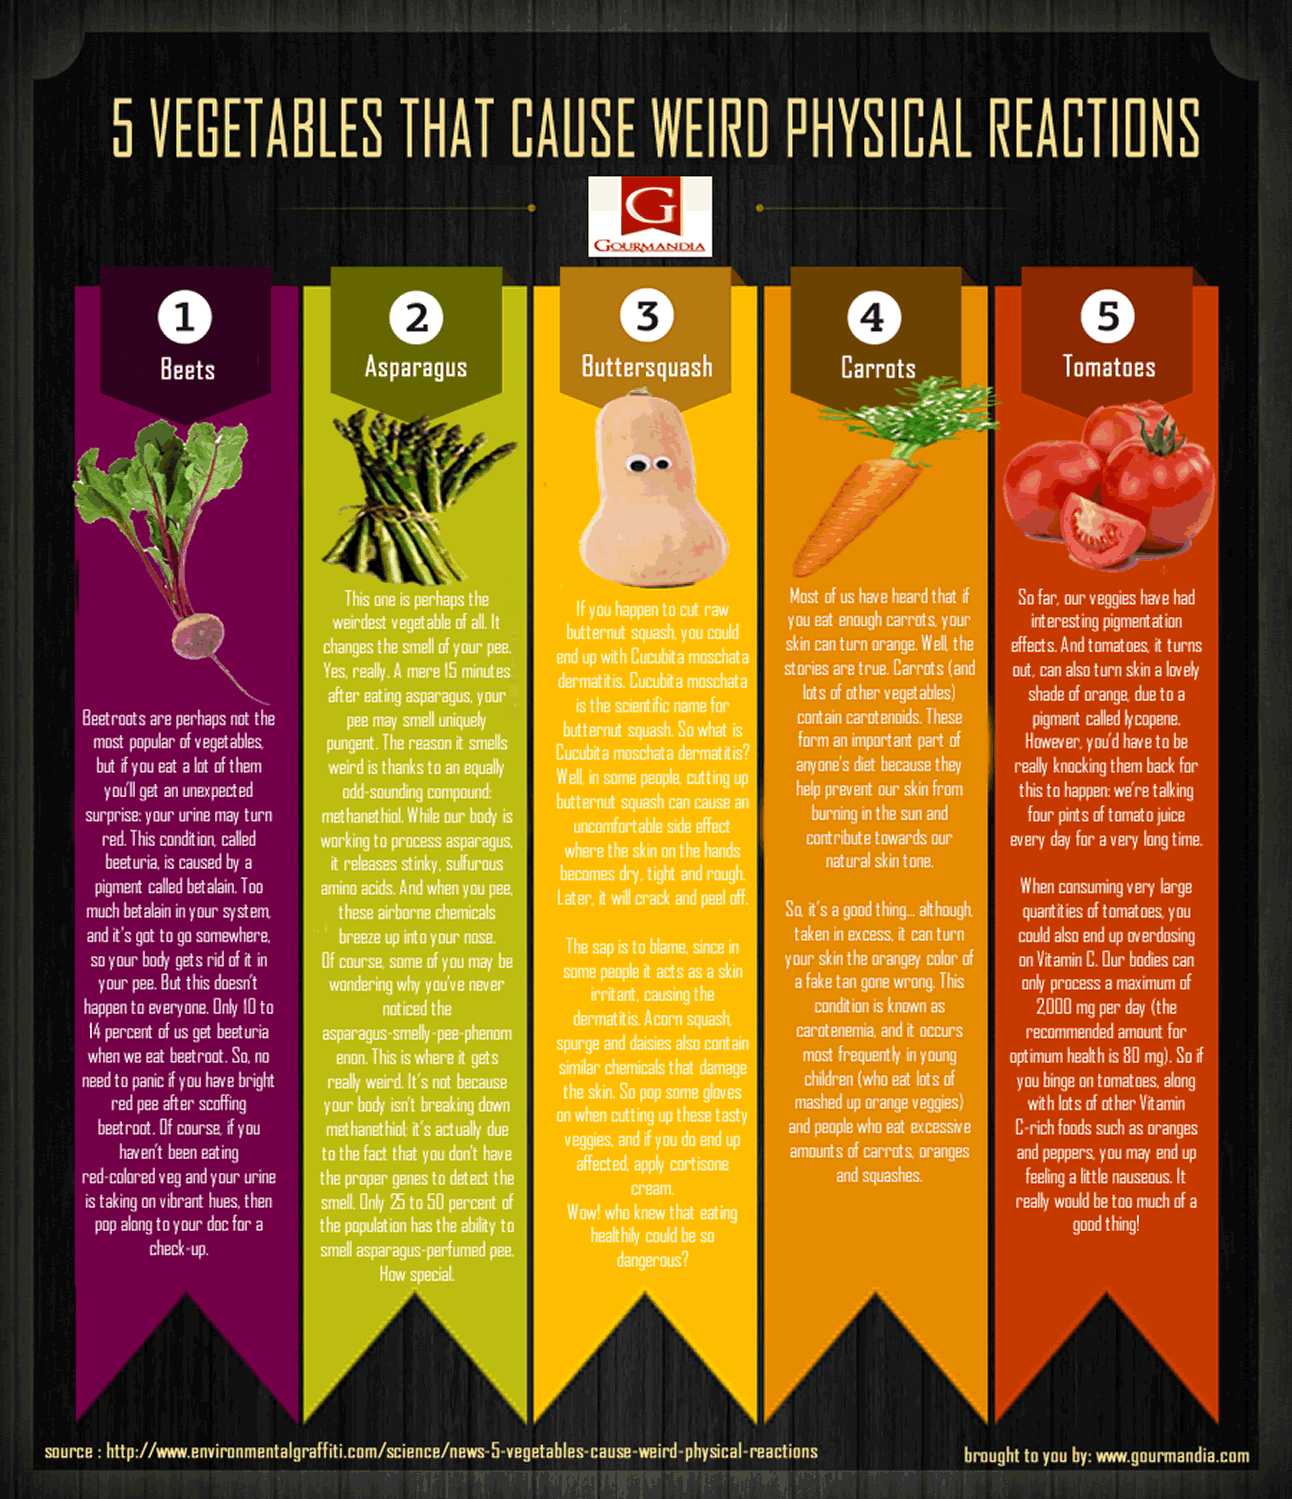 5 VEGETABLES THAT CAUSE WEIRD PHYSICAL REACTIONS Infographic